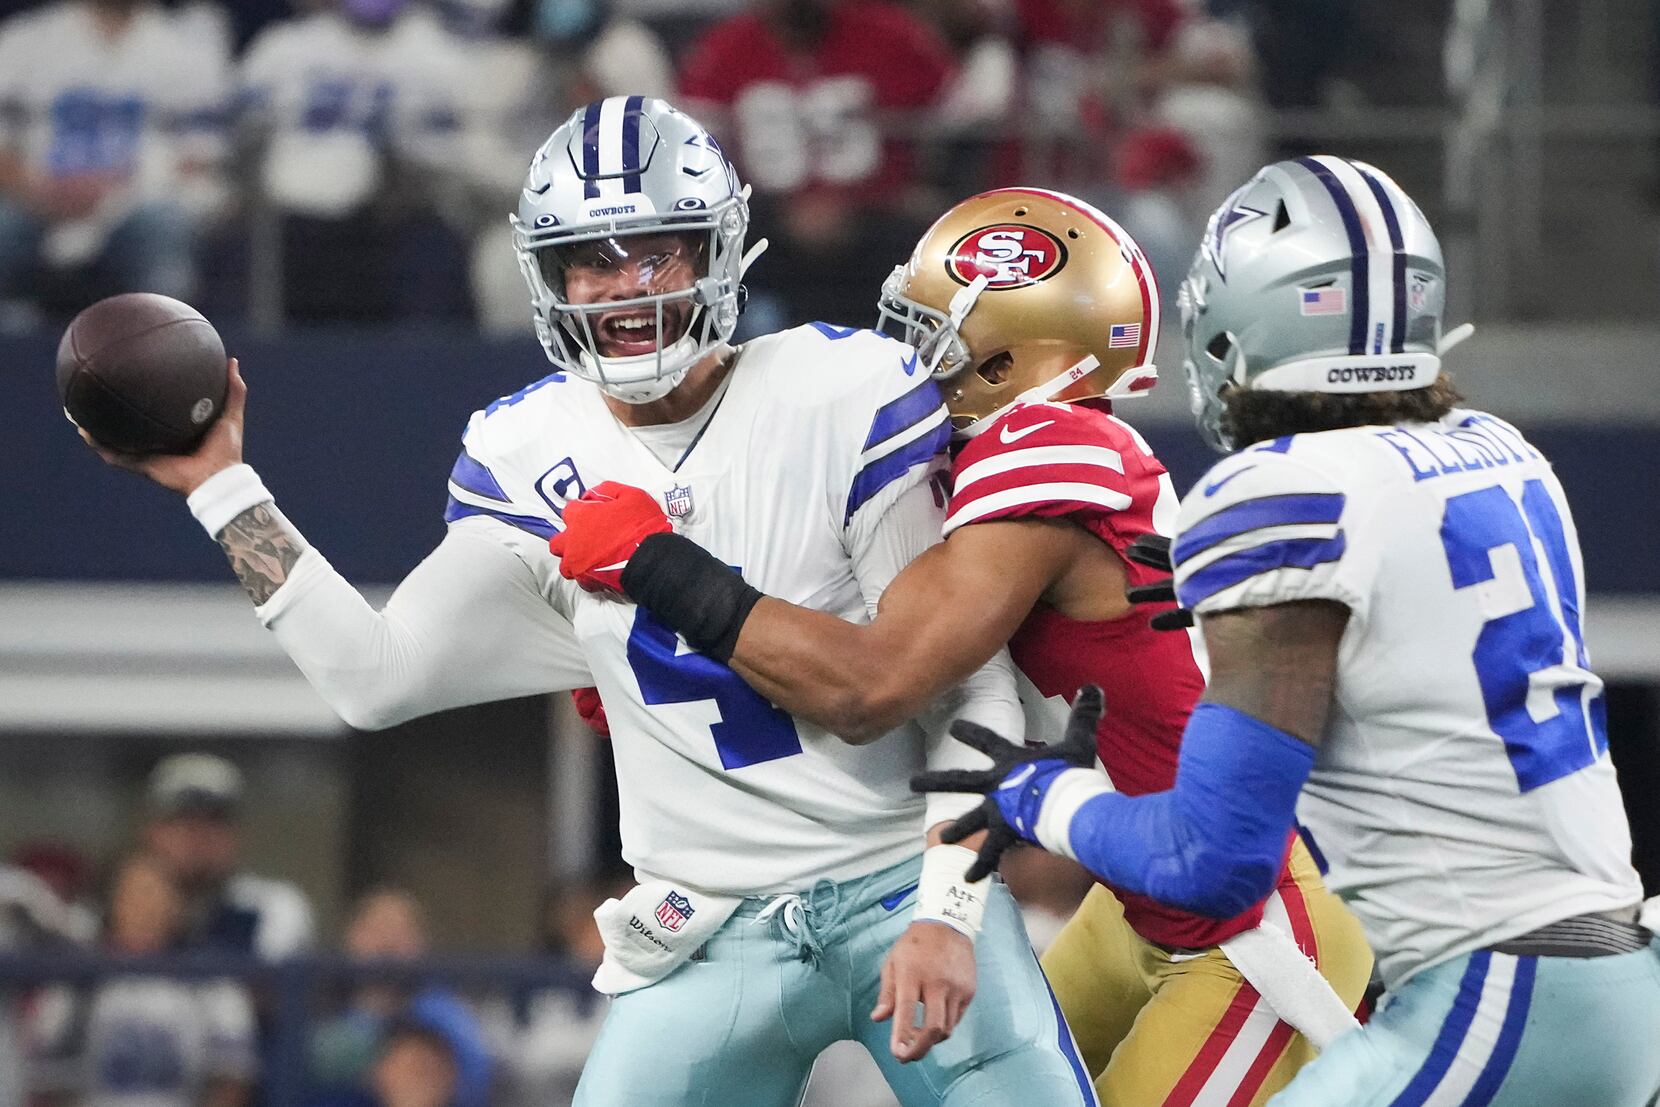 Cowboys Can't Overcome Penalties, Sacks, Lose to 49ers in Wild